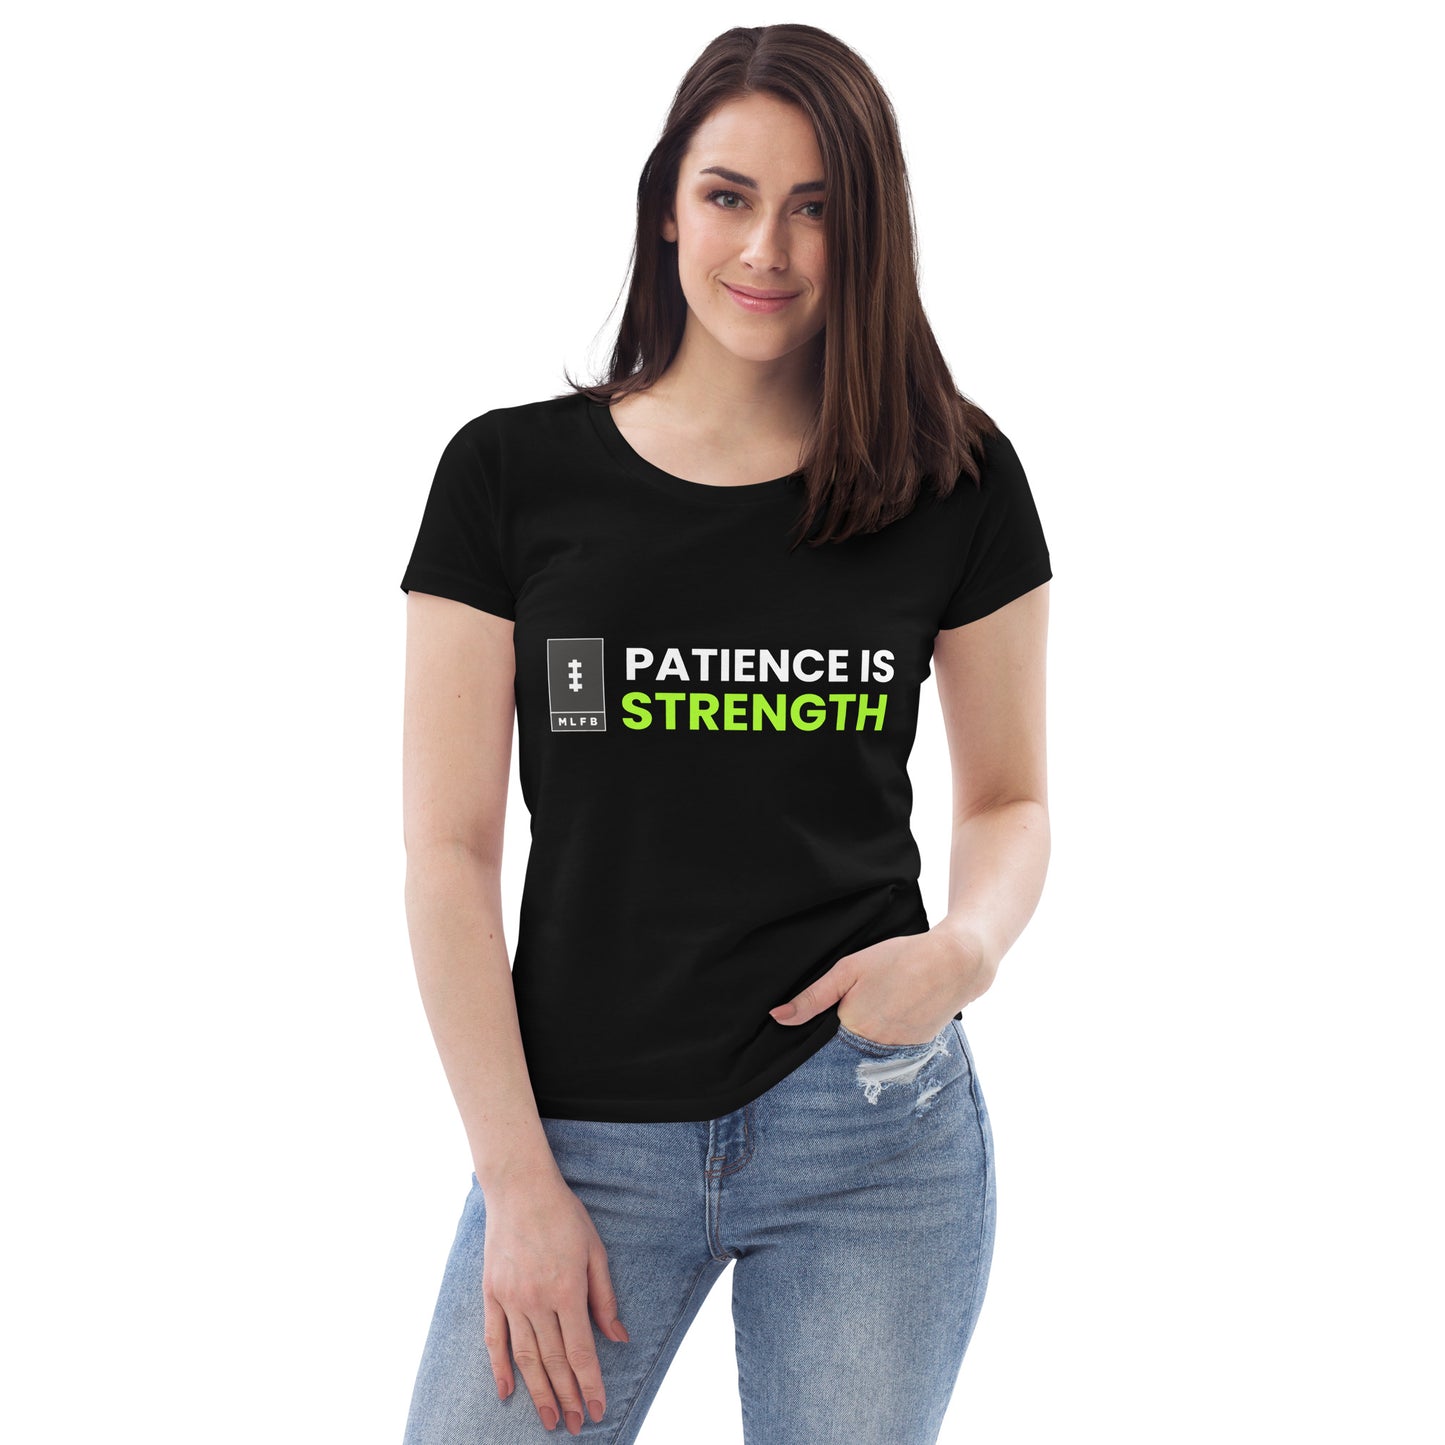 Women's MLFB Patience Is Strength fitted eco tee